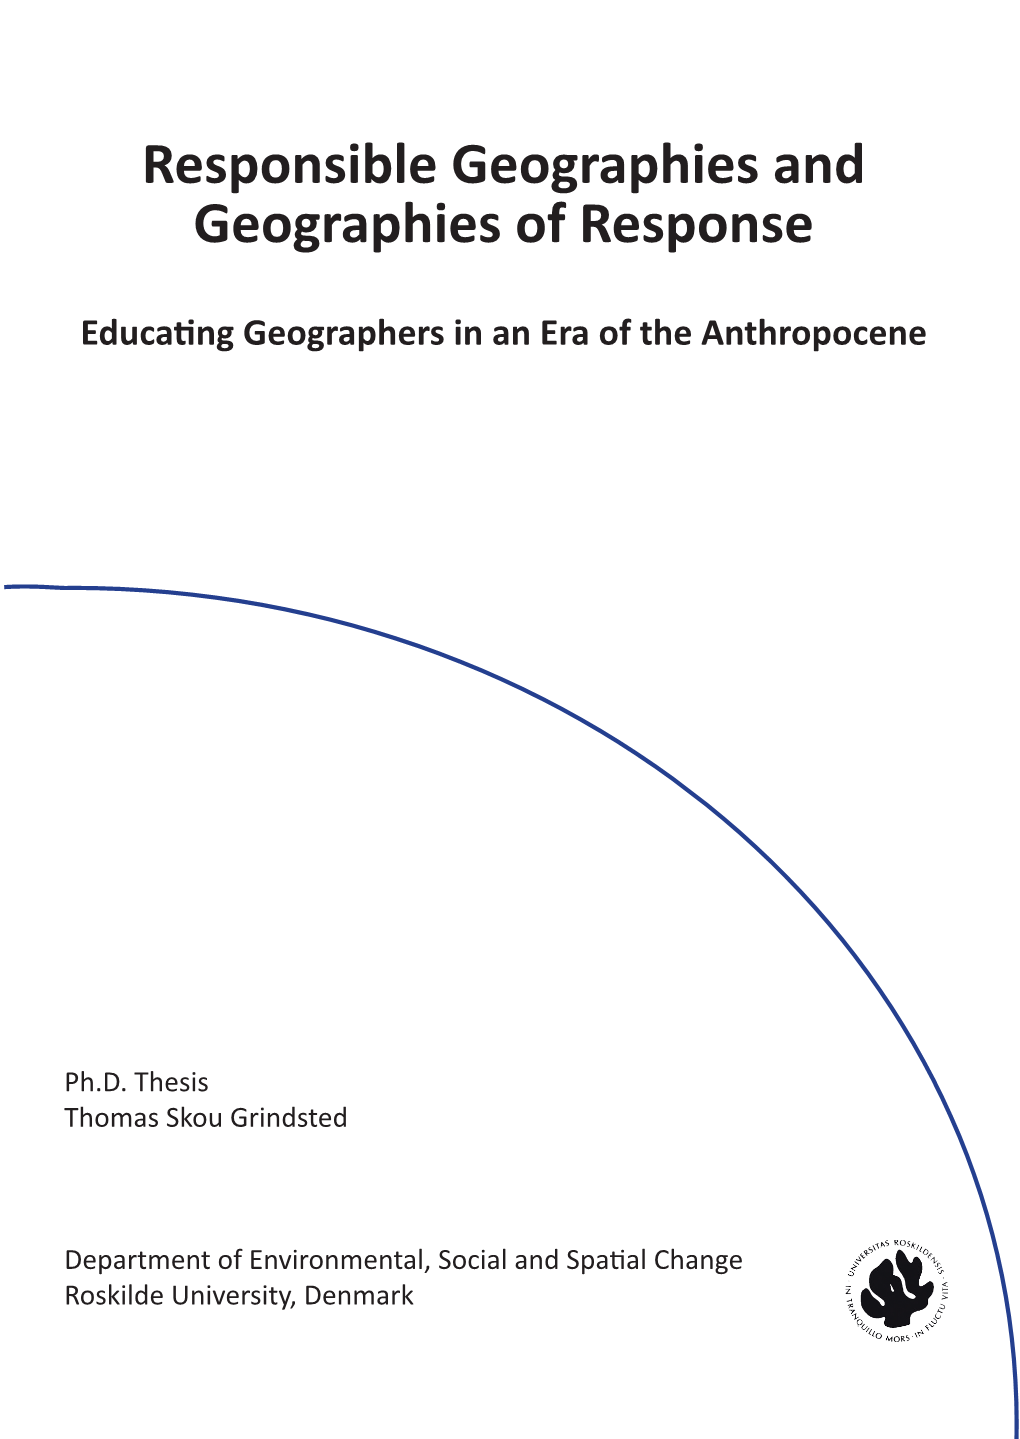 Responsible Geographies and Geographies of Response